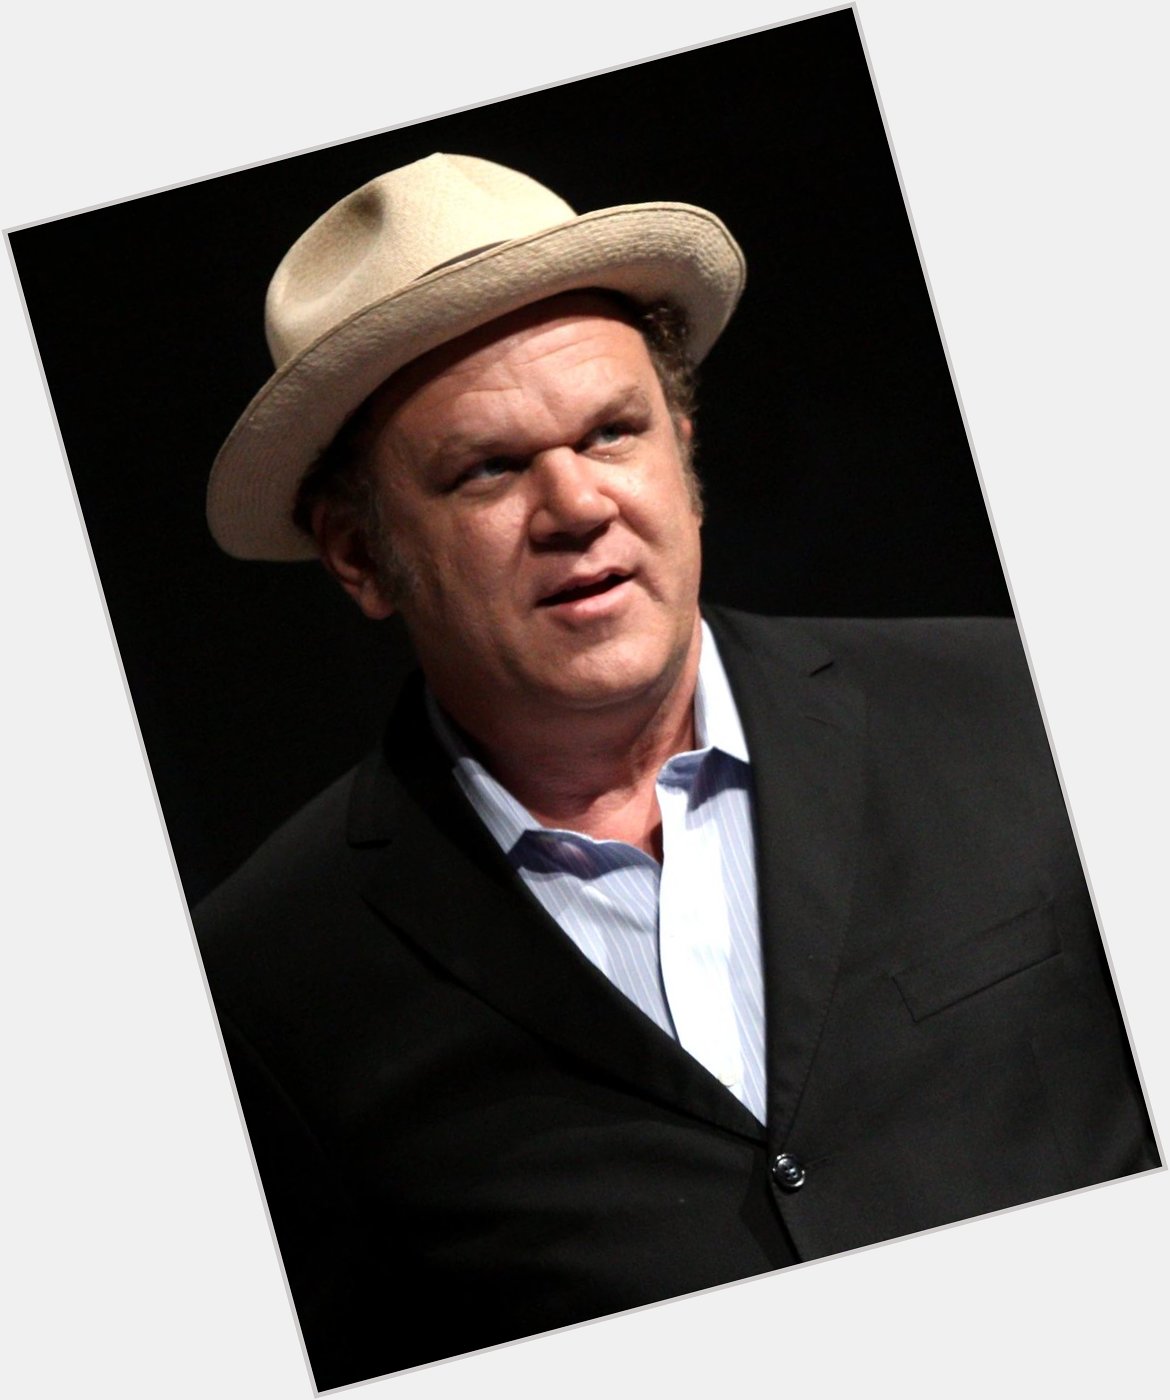 Happy 58th Birthday to American actor, comedian, musician, producer, & writer, John C. Reilly!  